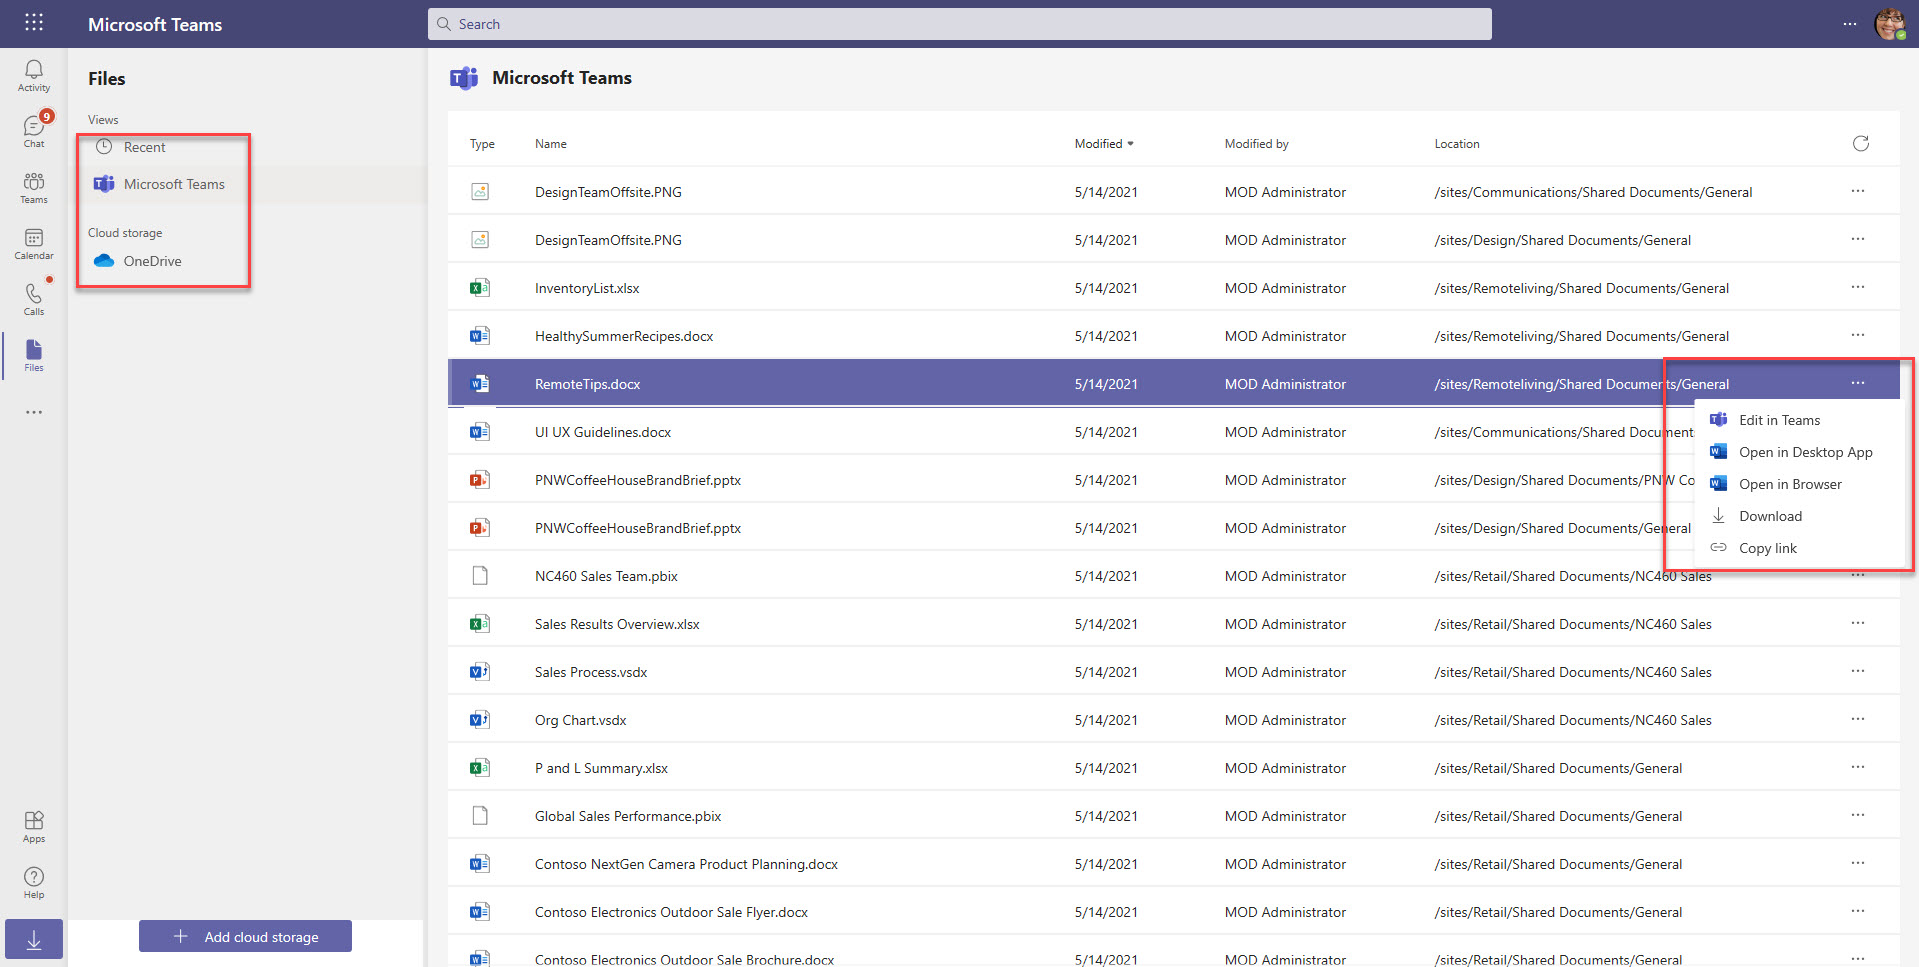 How to view recent files in Microsoft Teams